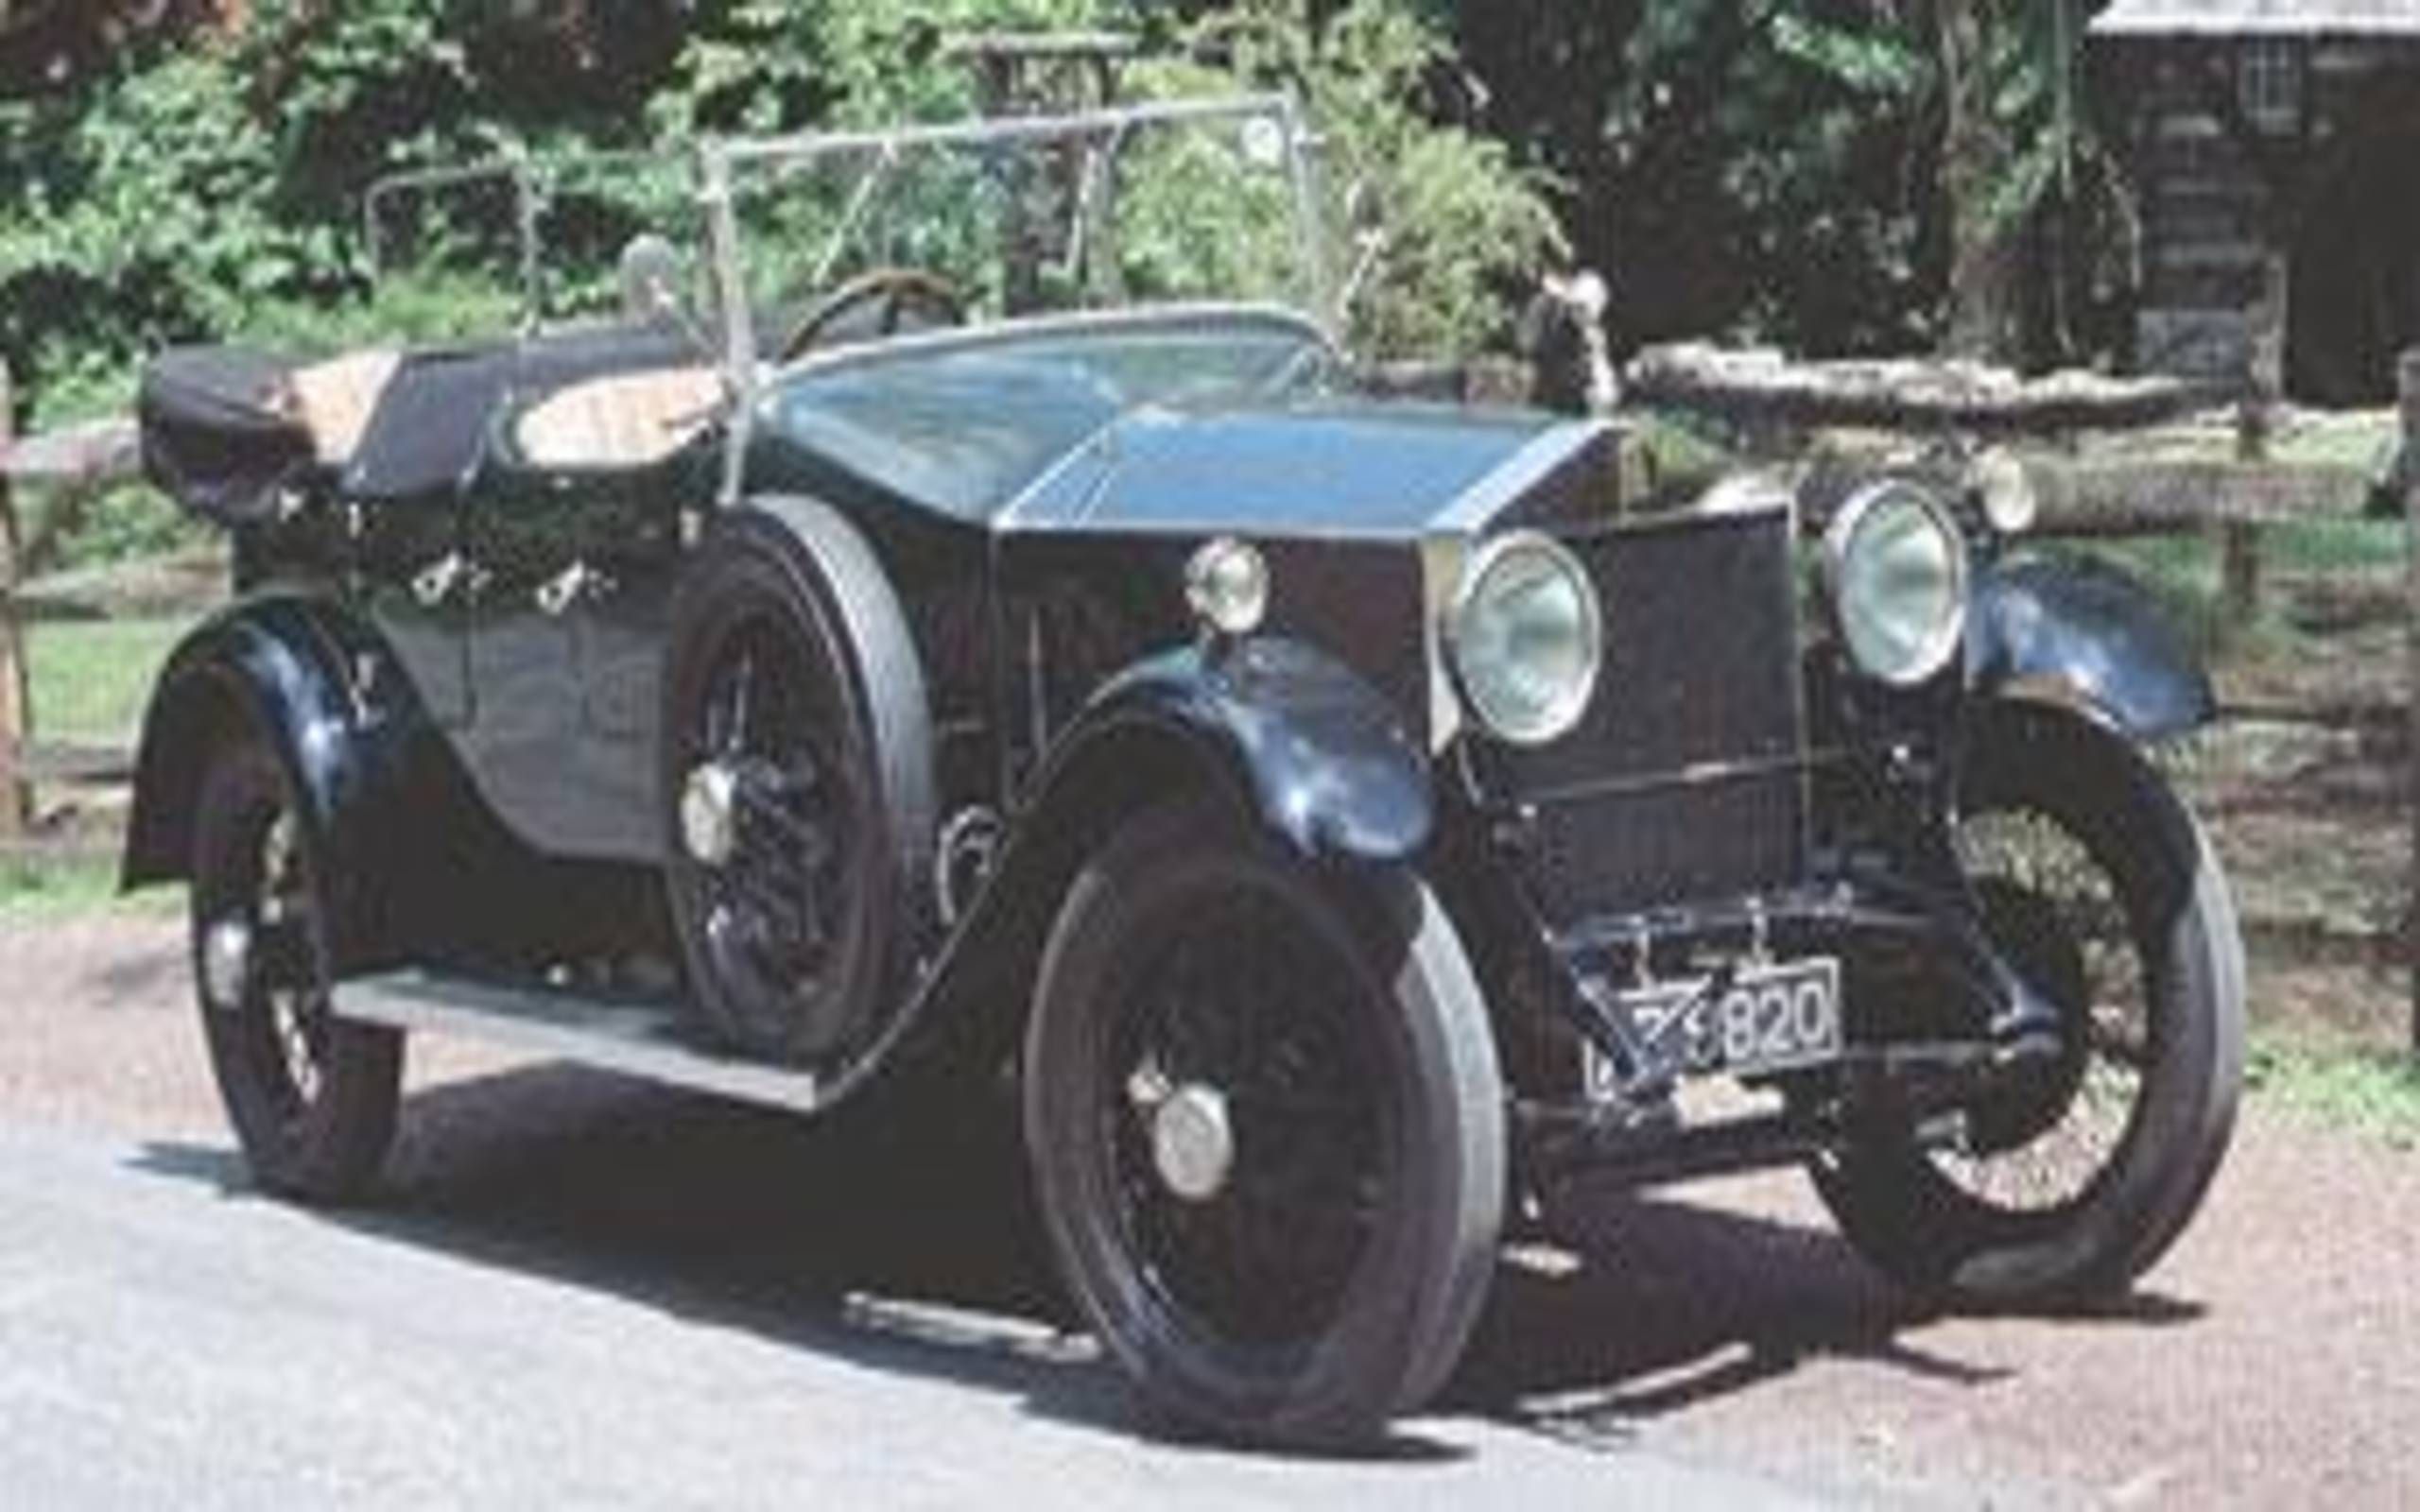 1924 RollsRoyce 4050 Silver Ghost is listed Sold on ClassicDigest in  Grays by Vintage Prestige for 240000  ClassicDigestcom